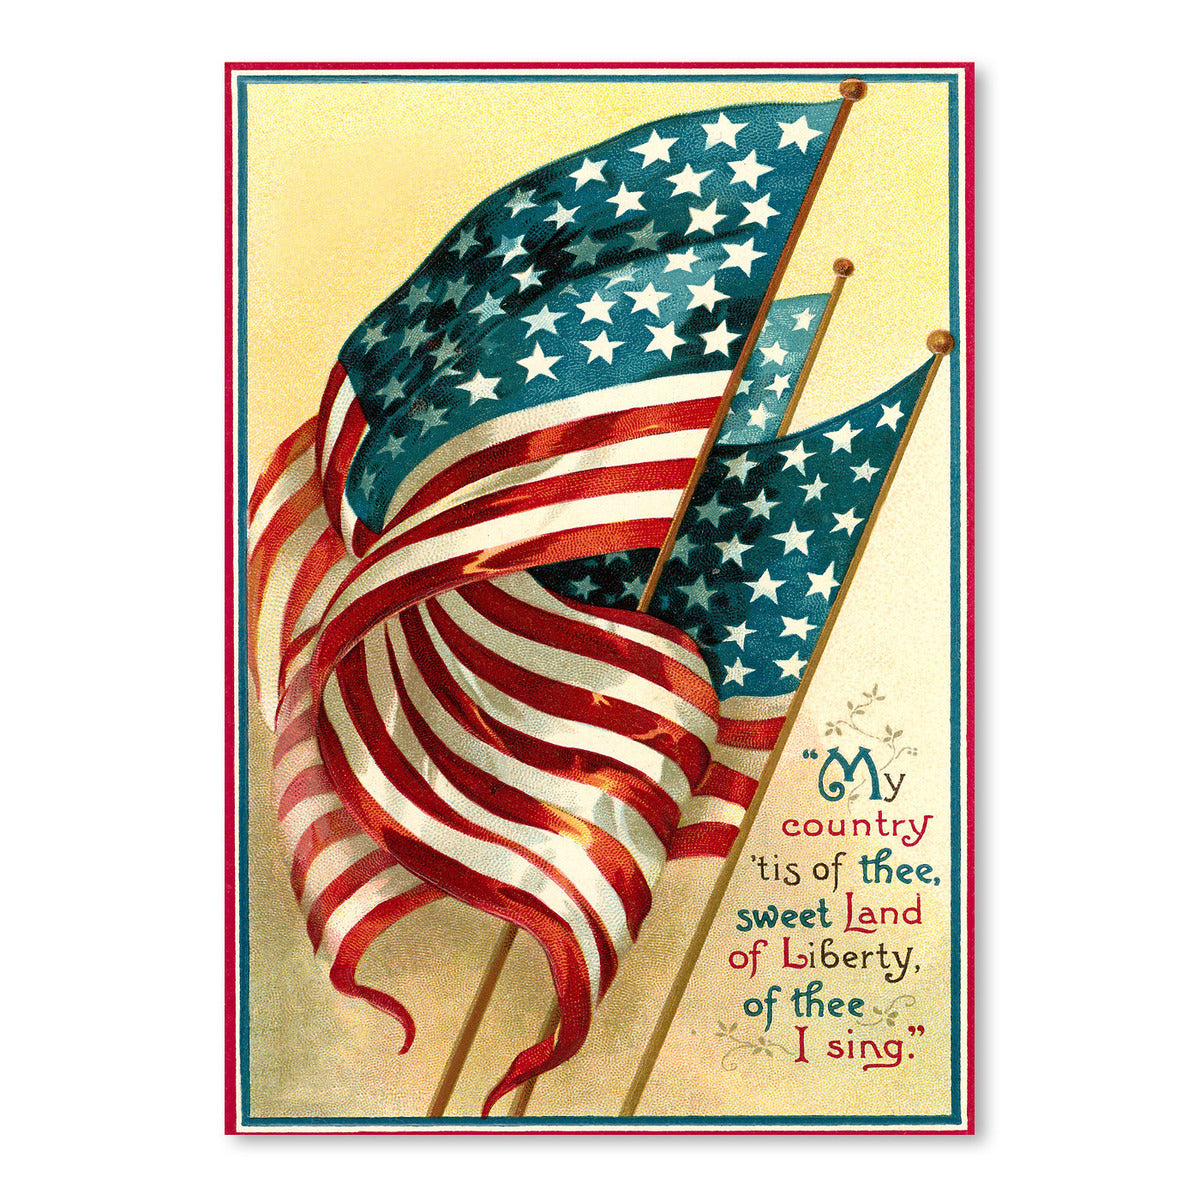 My Country Tis Of Thee by Found Image Press Art Print - Art Print - Americanflat